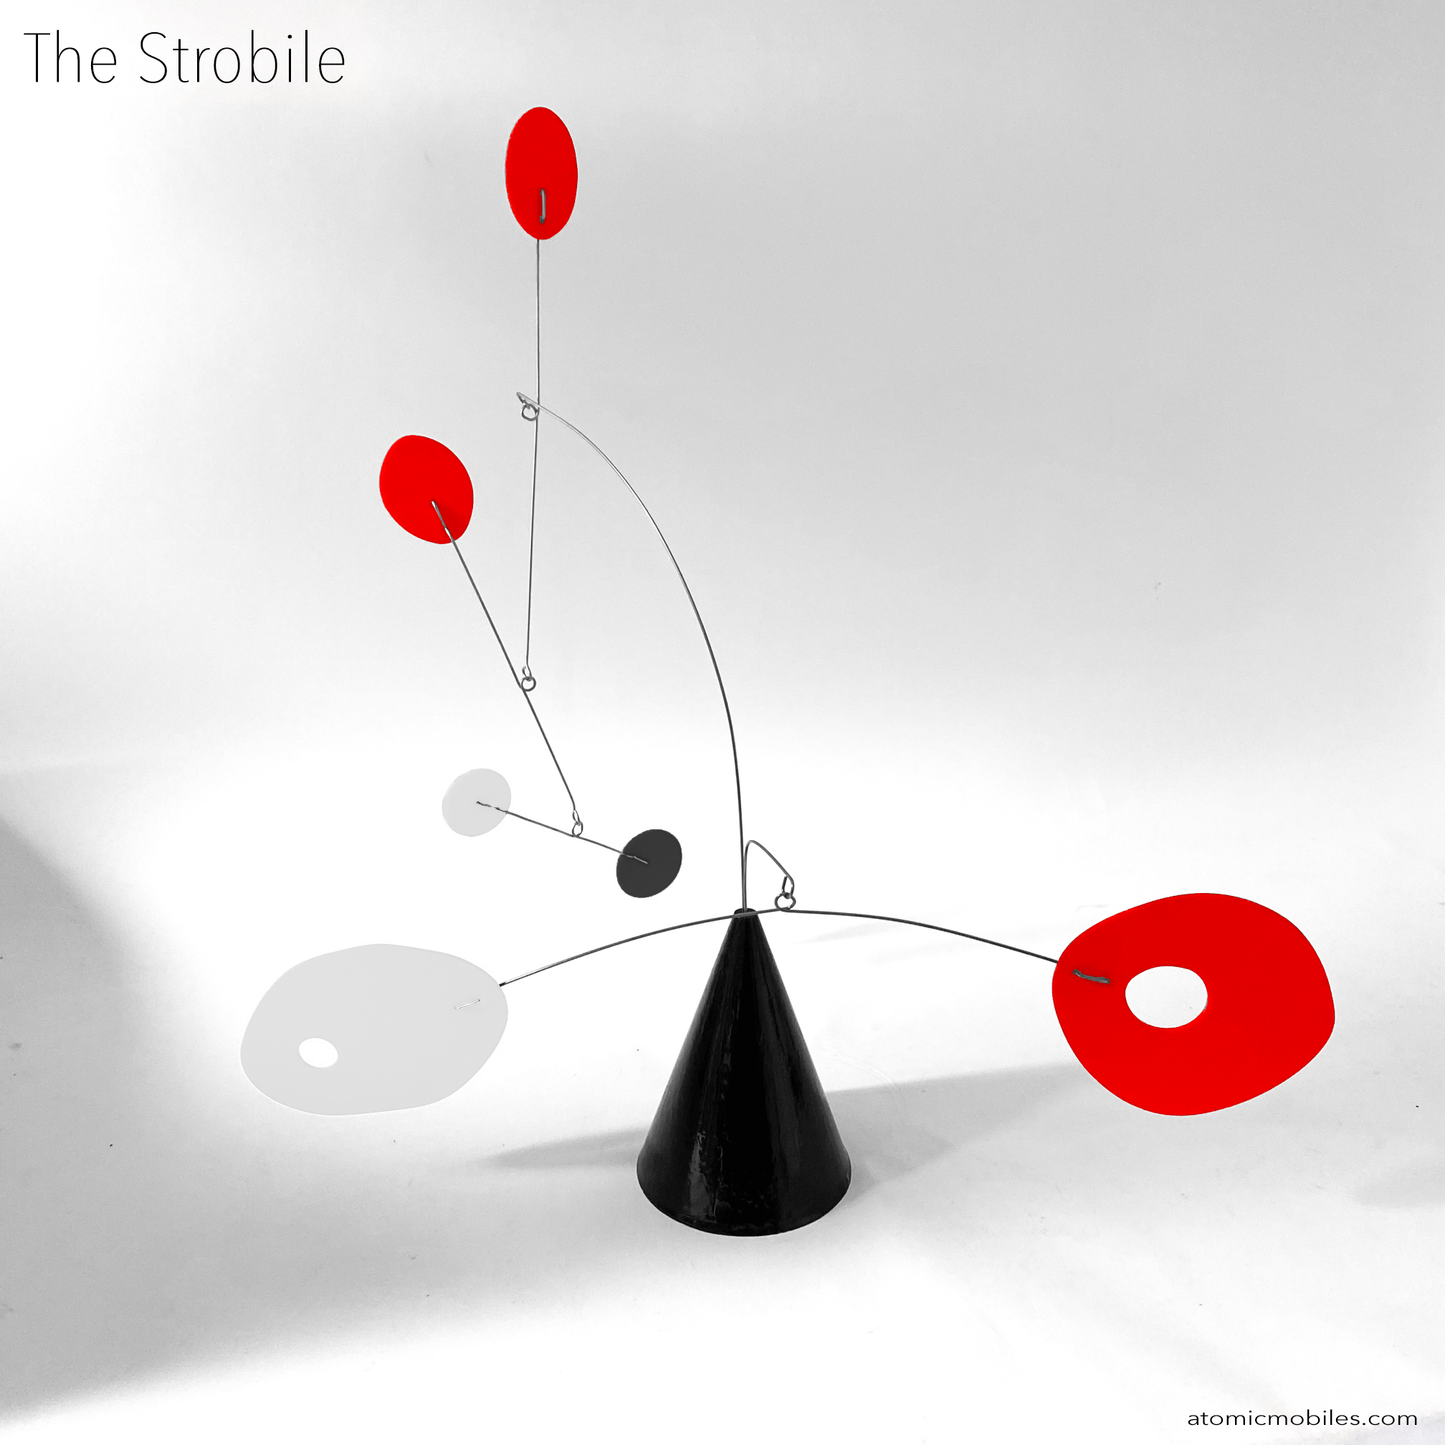 The Strobile table top kinetic art sculpture in red, black, and white by AtomicMobiles.com